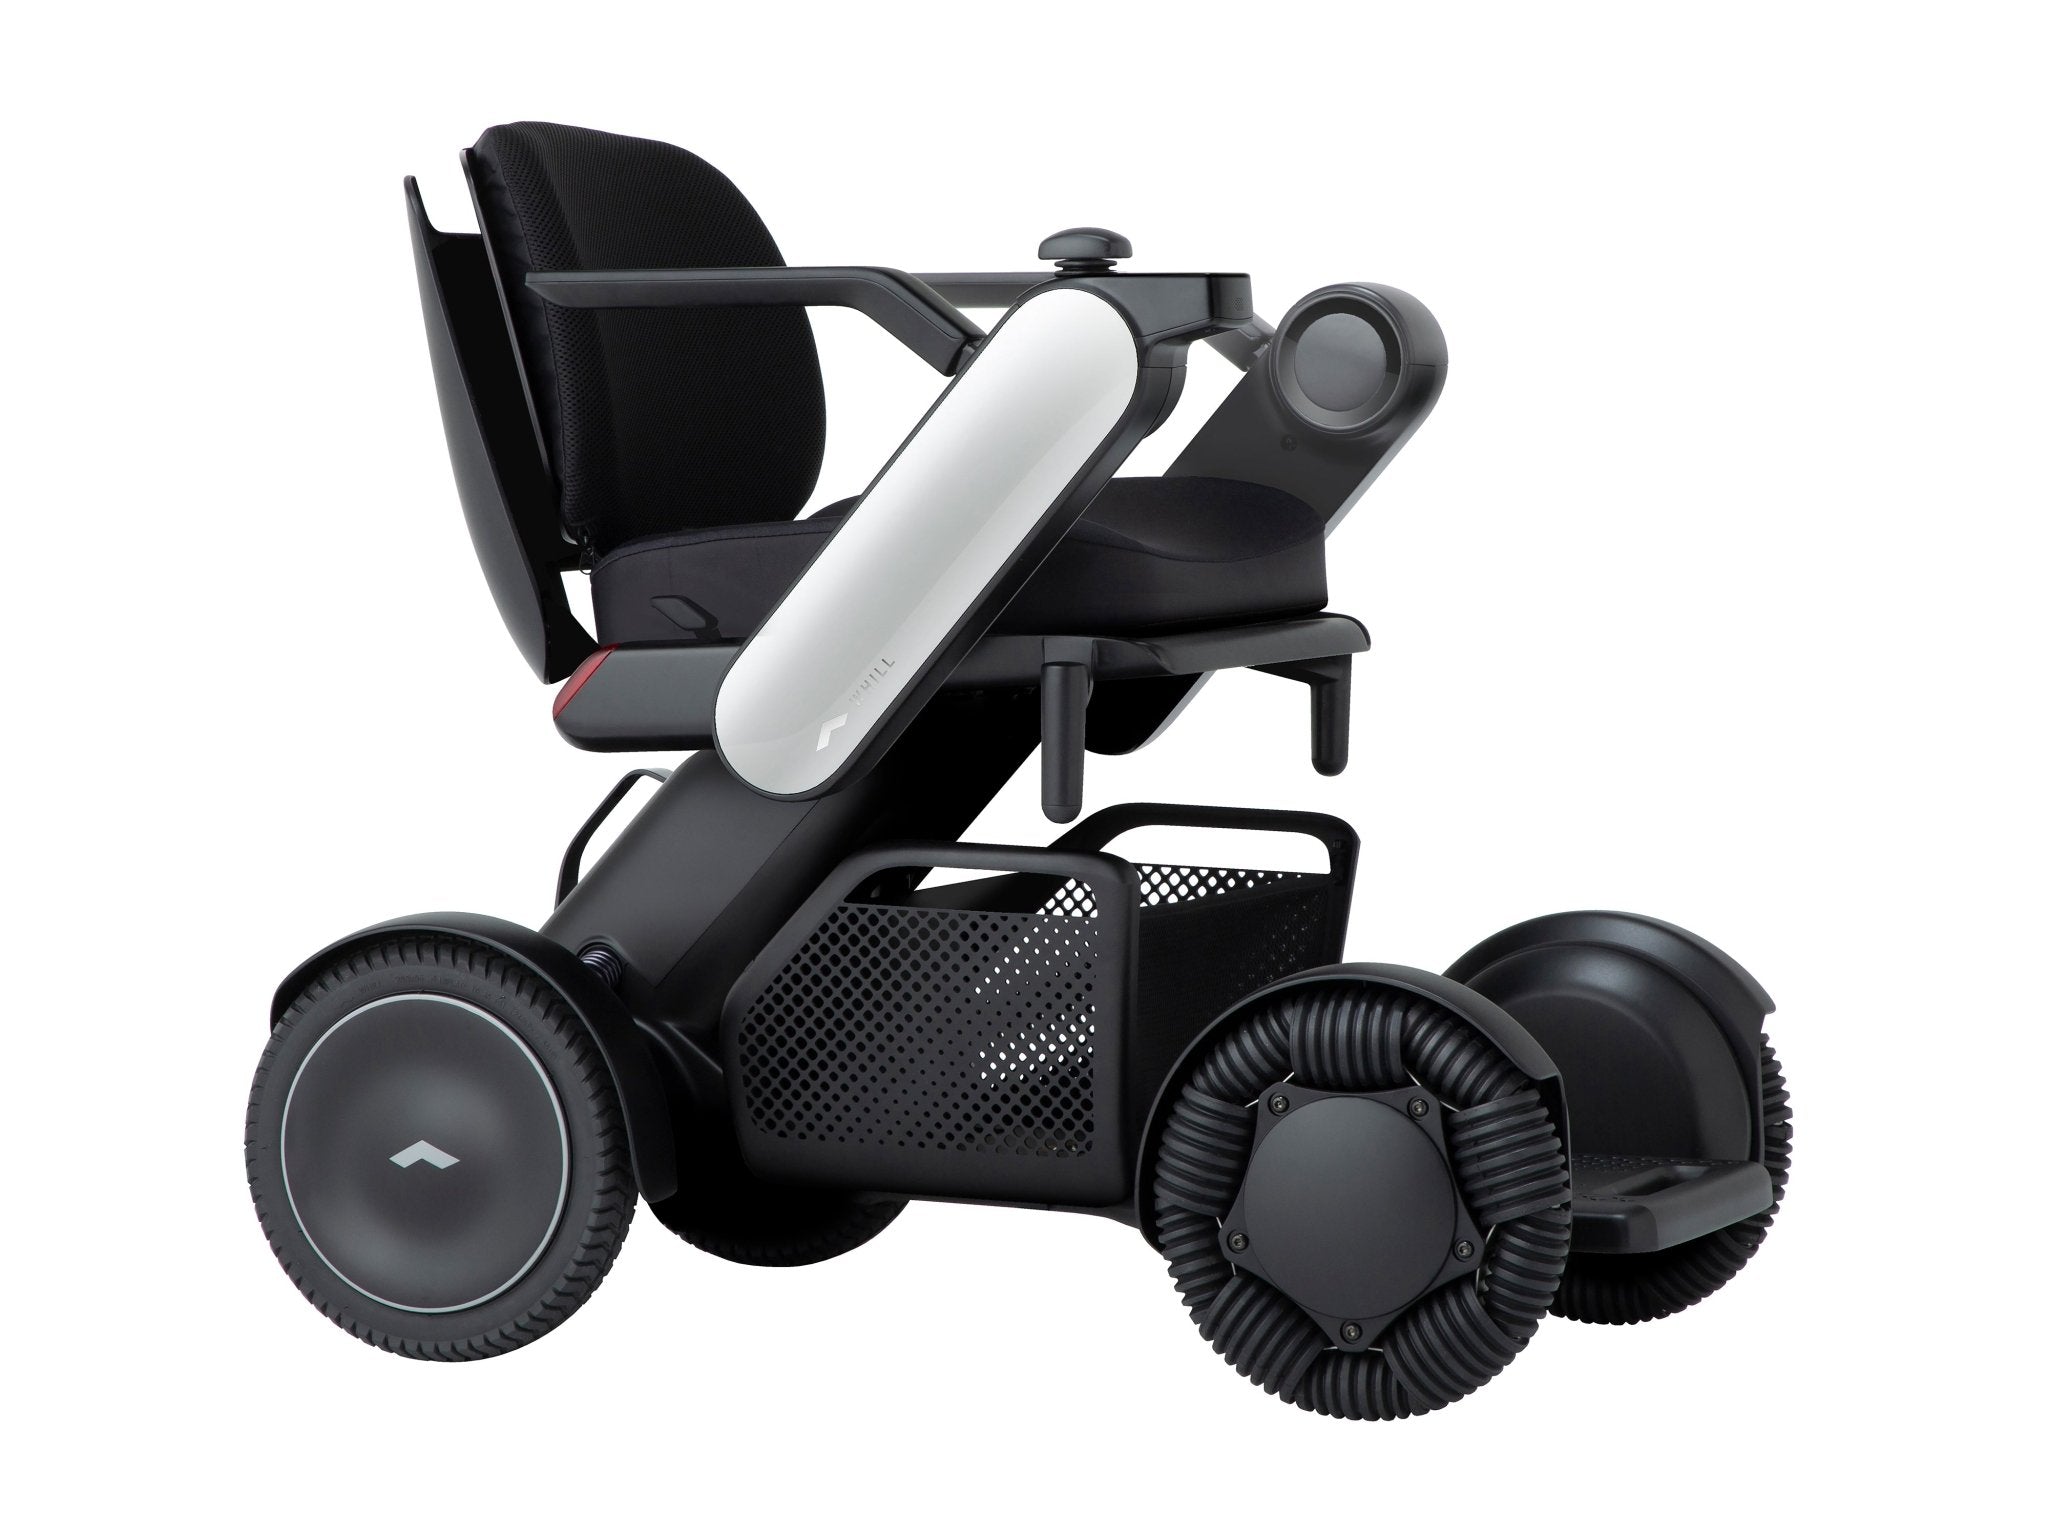 WHILL Model Ci2 Smart Power Chair – Compact , Intelligent, and Ultra - Portable Mobility Solution - Midwest DME Supply